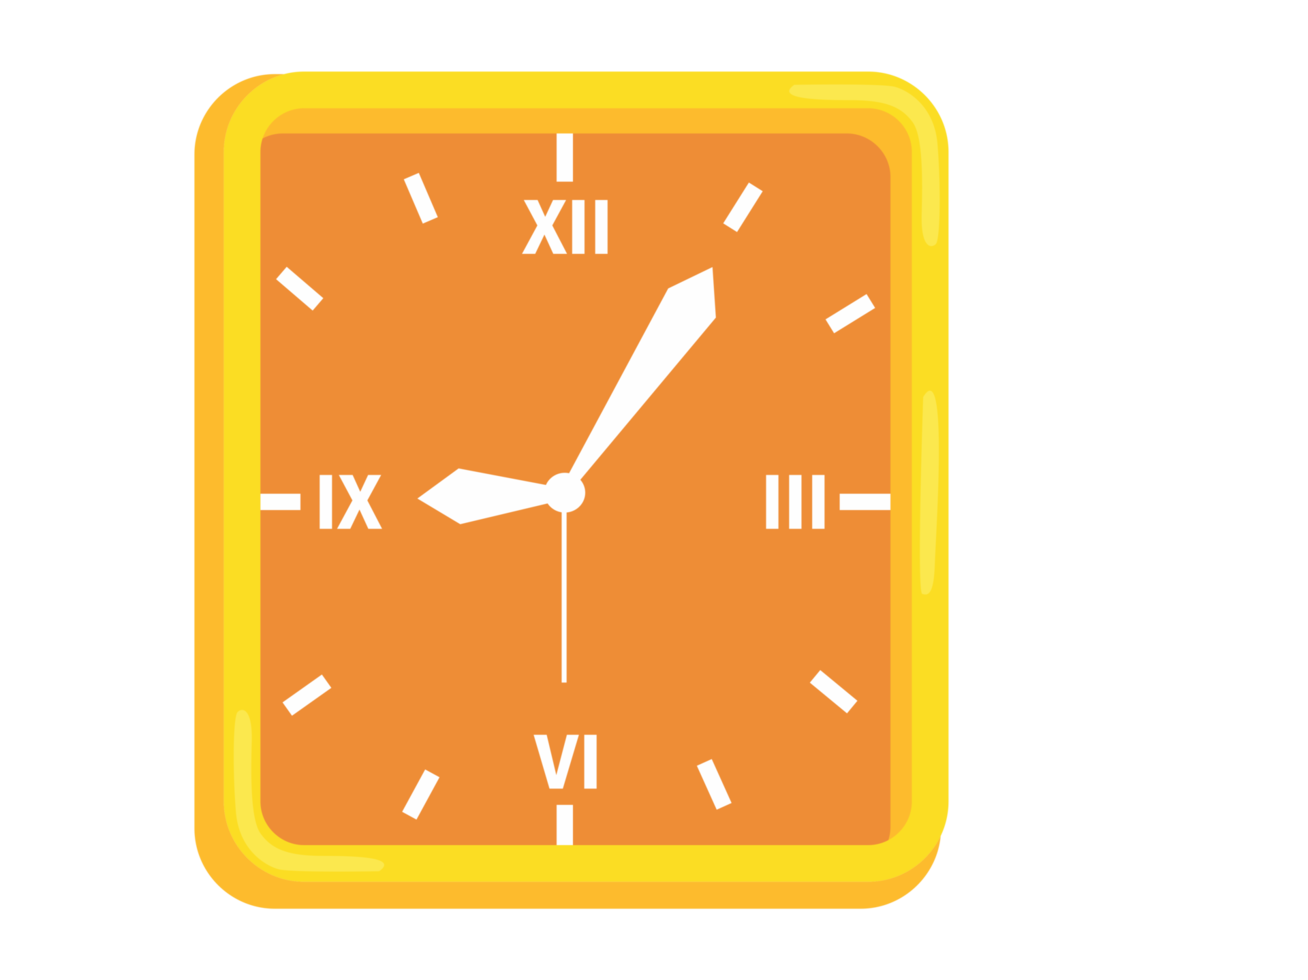 Object - Clock with Square shape png